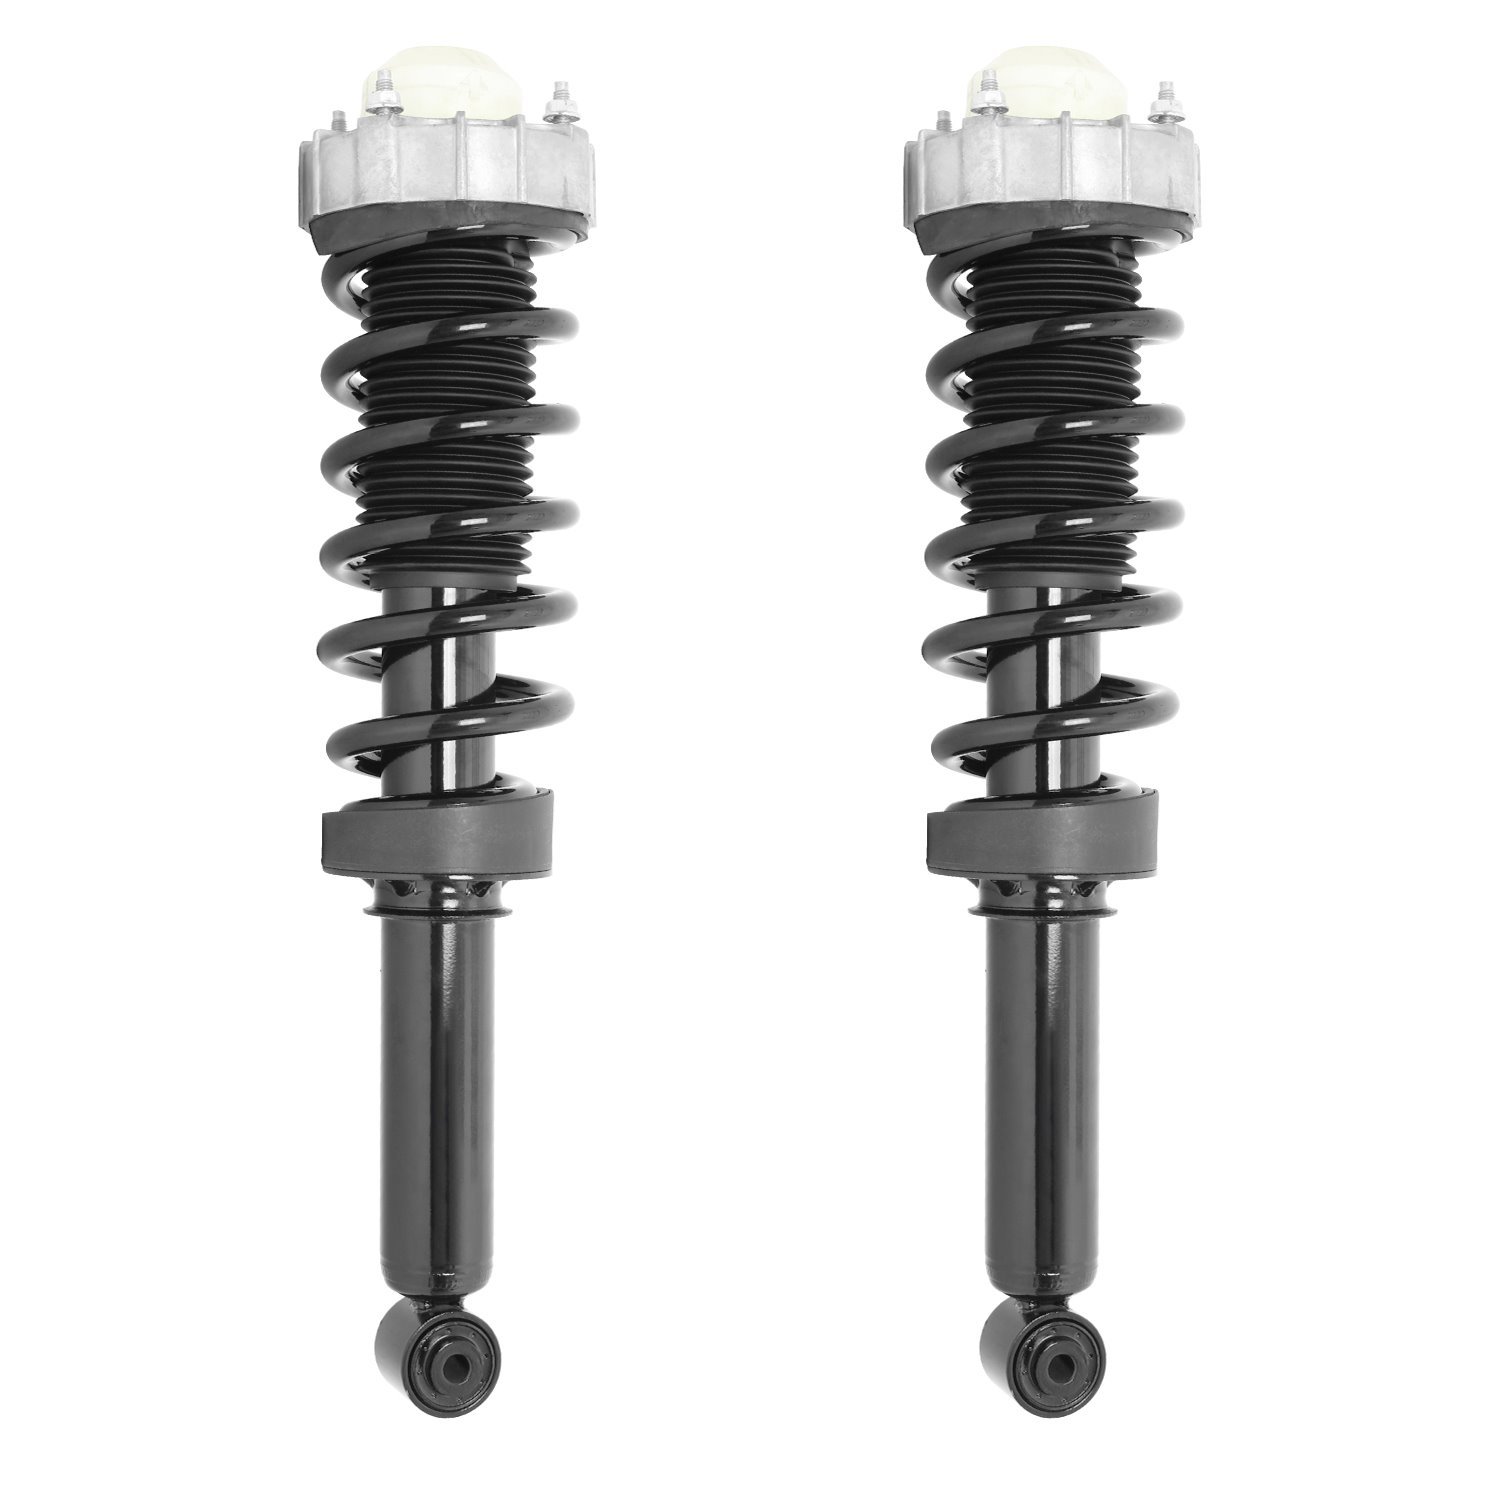 31-532500 Air Spring To Coil Spring Conversion Kit Fits Select Porsche Cayenne, Audi Q7, Volkswagen Touareg